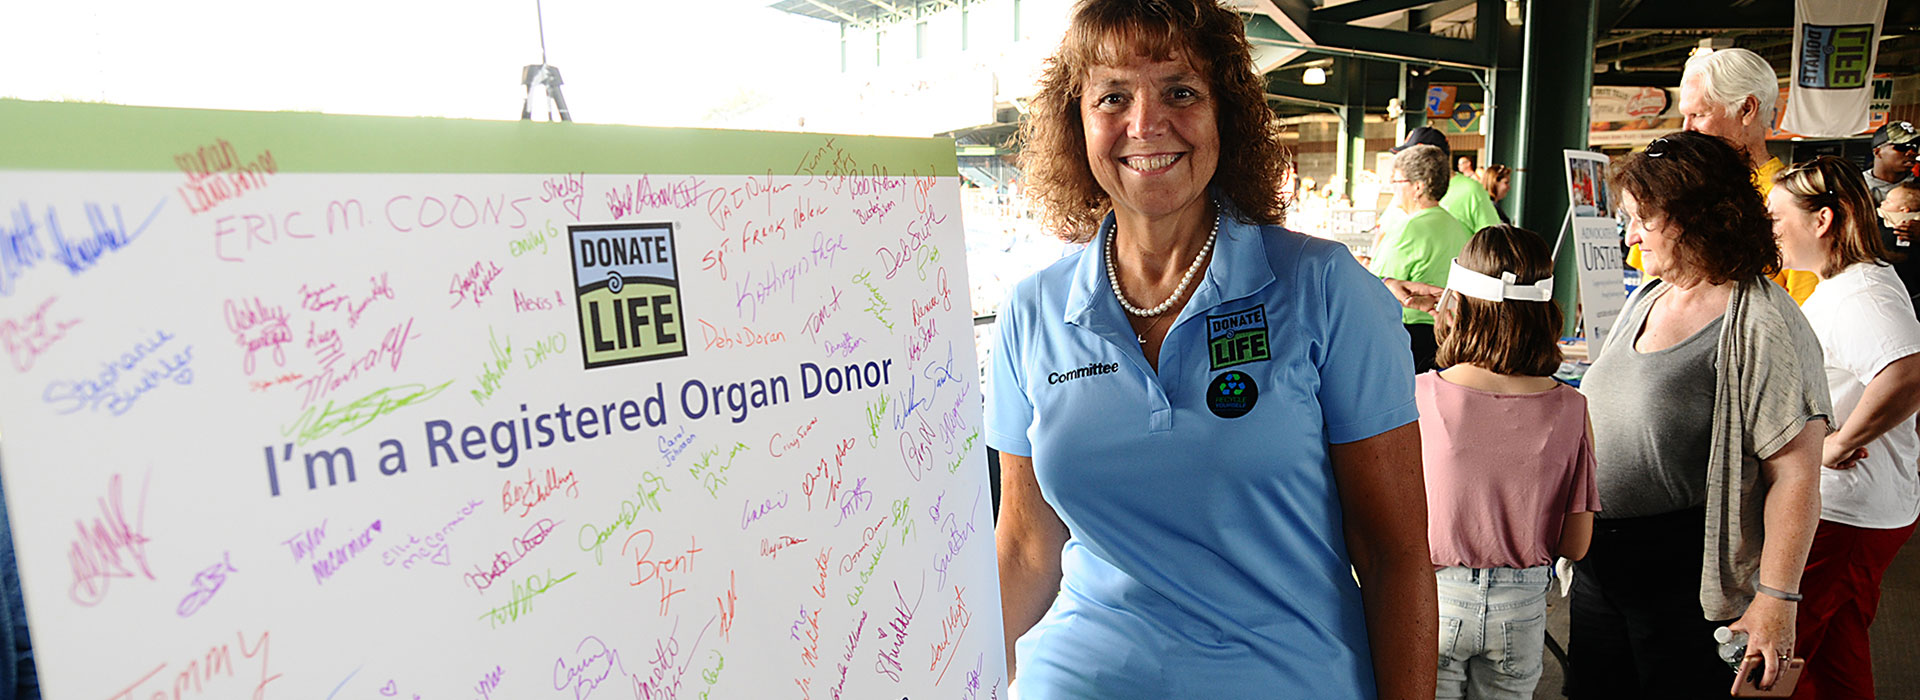 Patty King is an Organ Donor